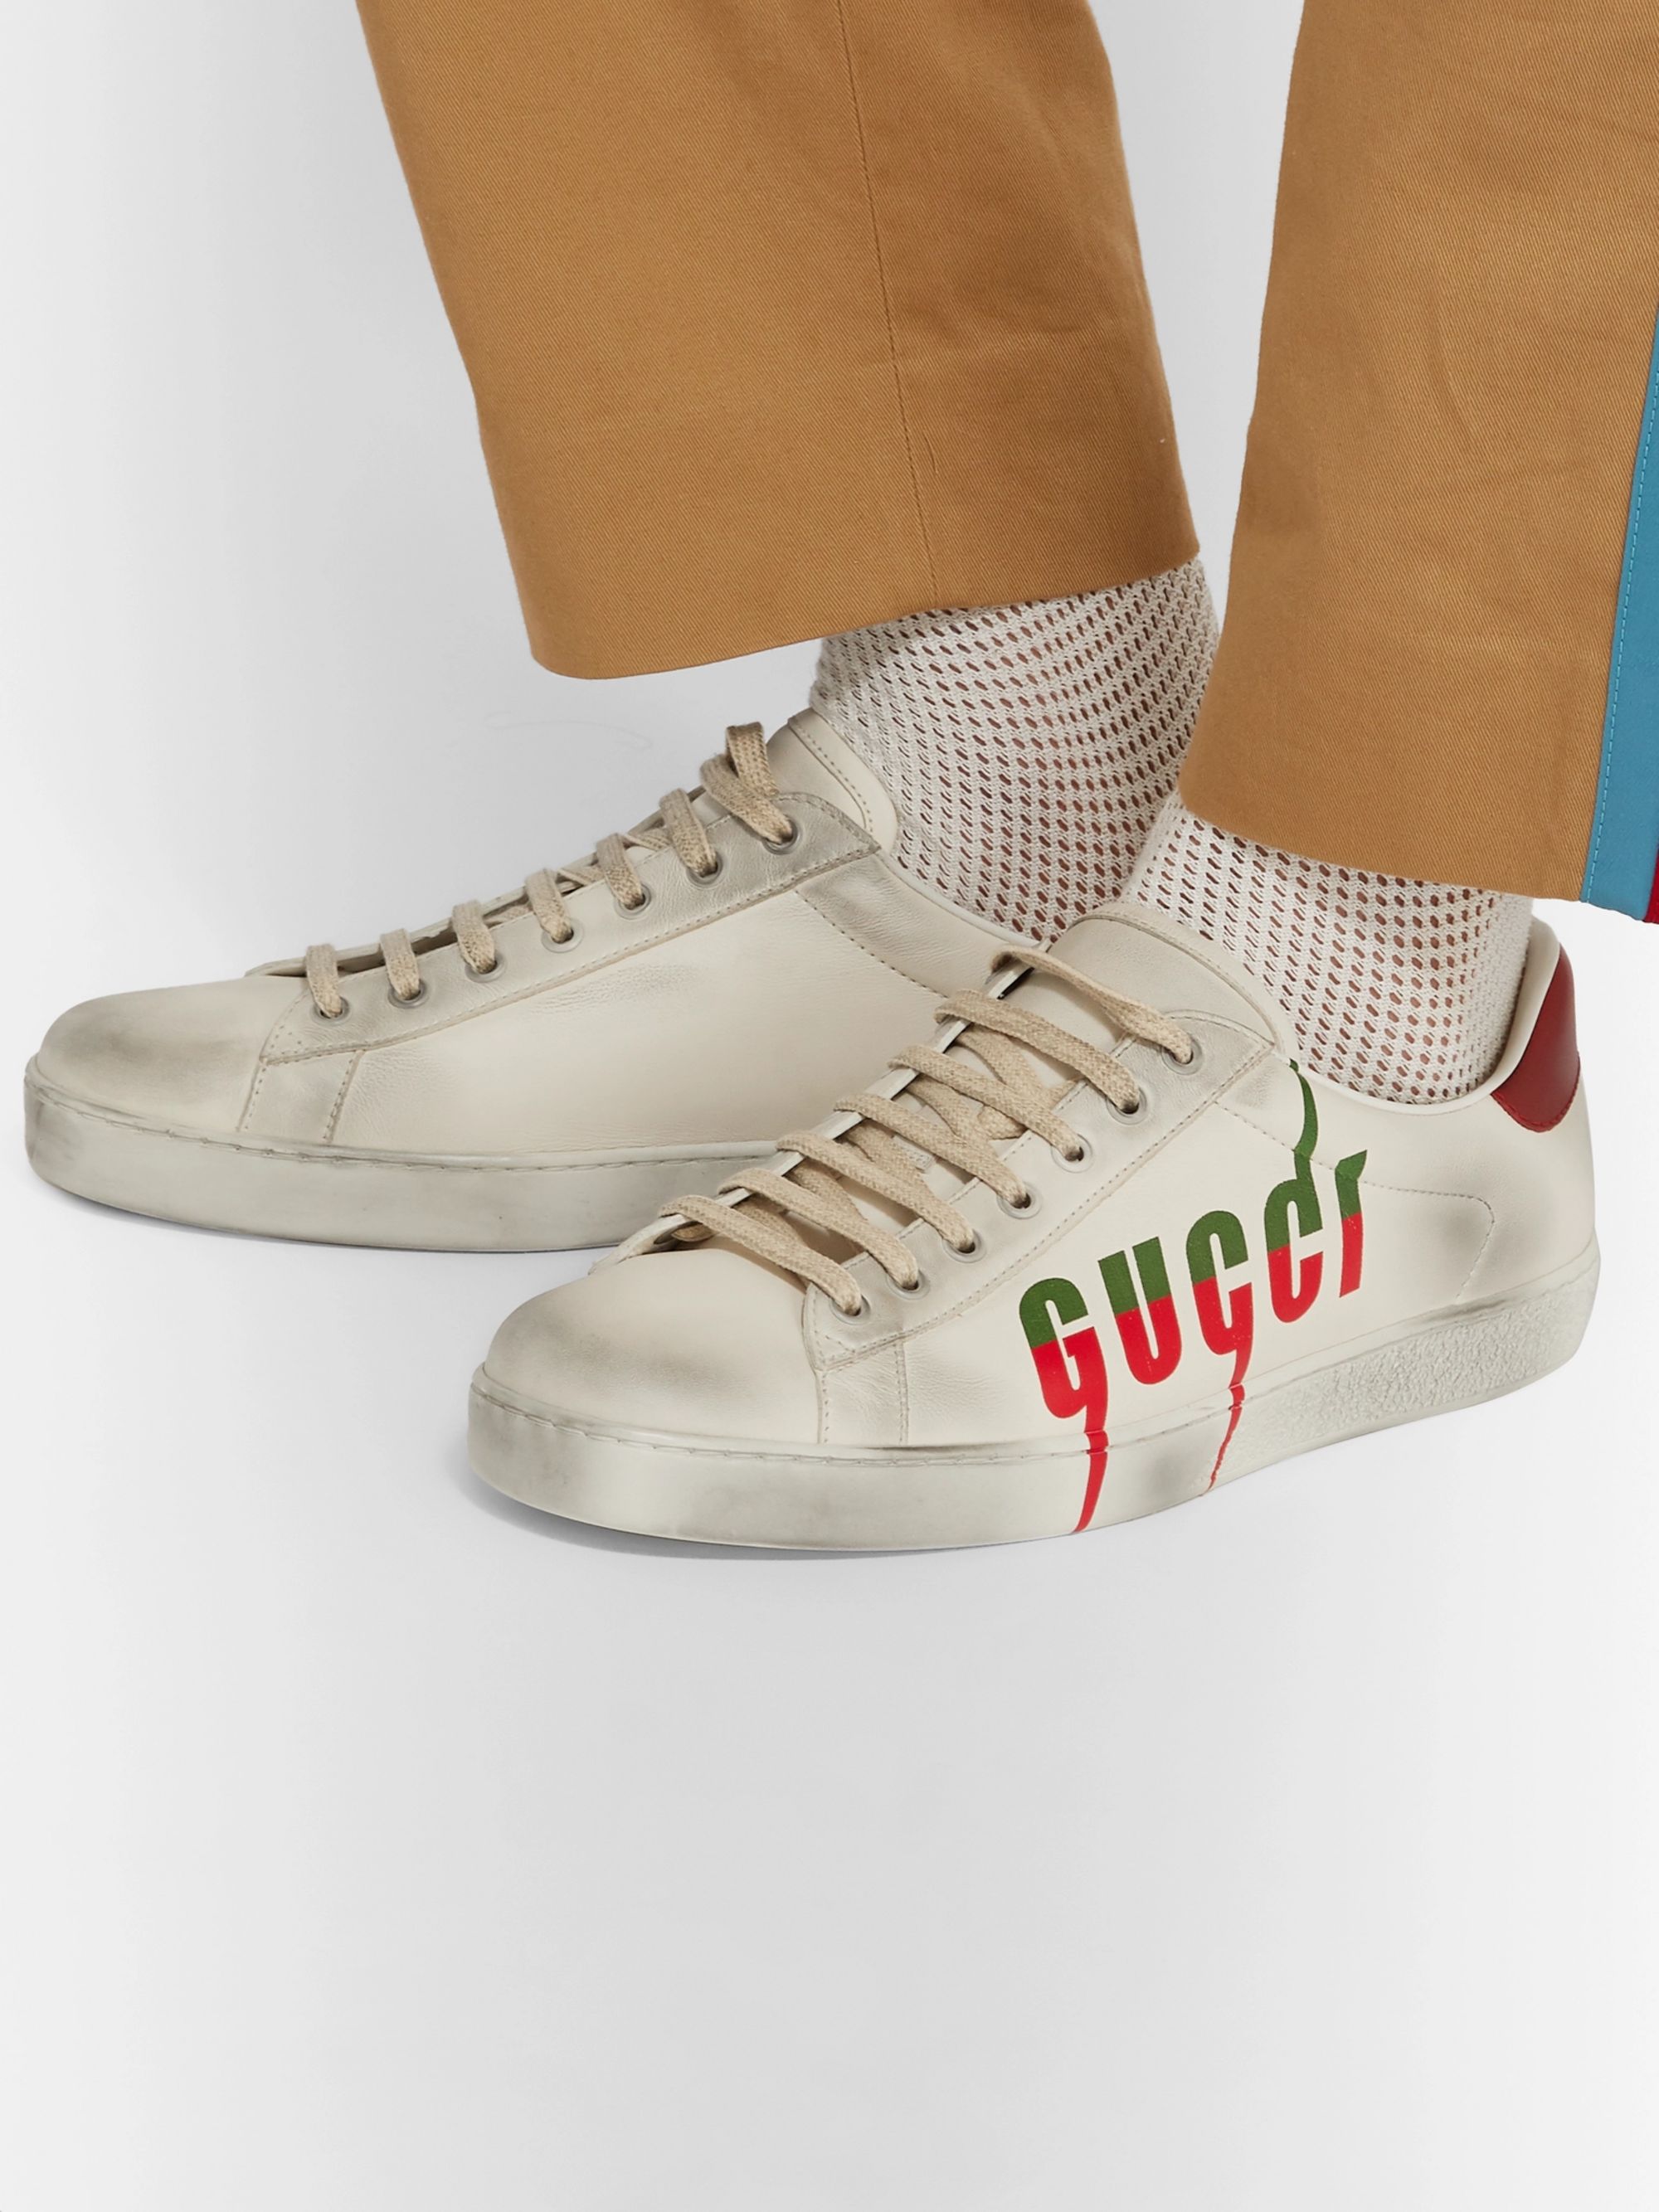 gucci distressed leather sneaker